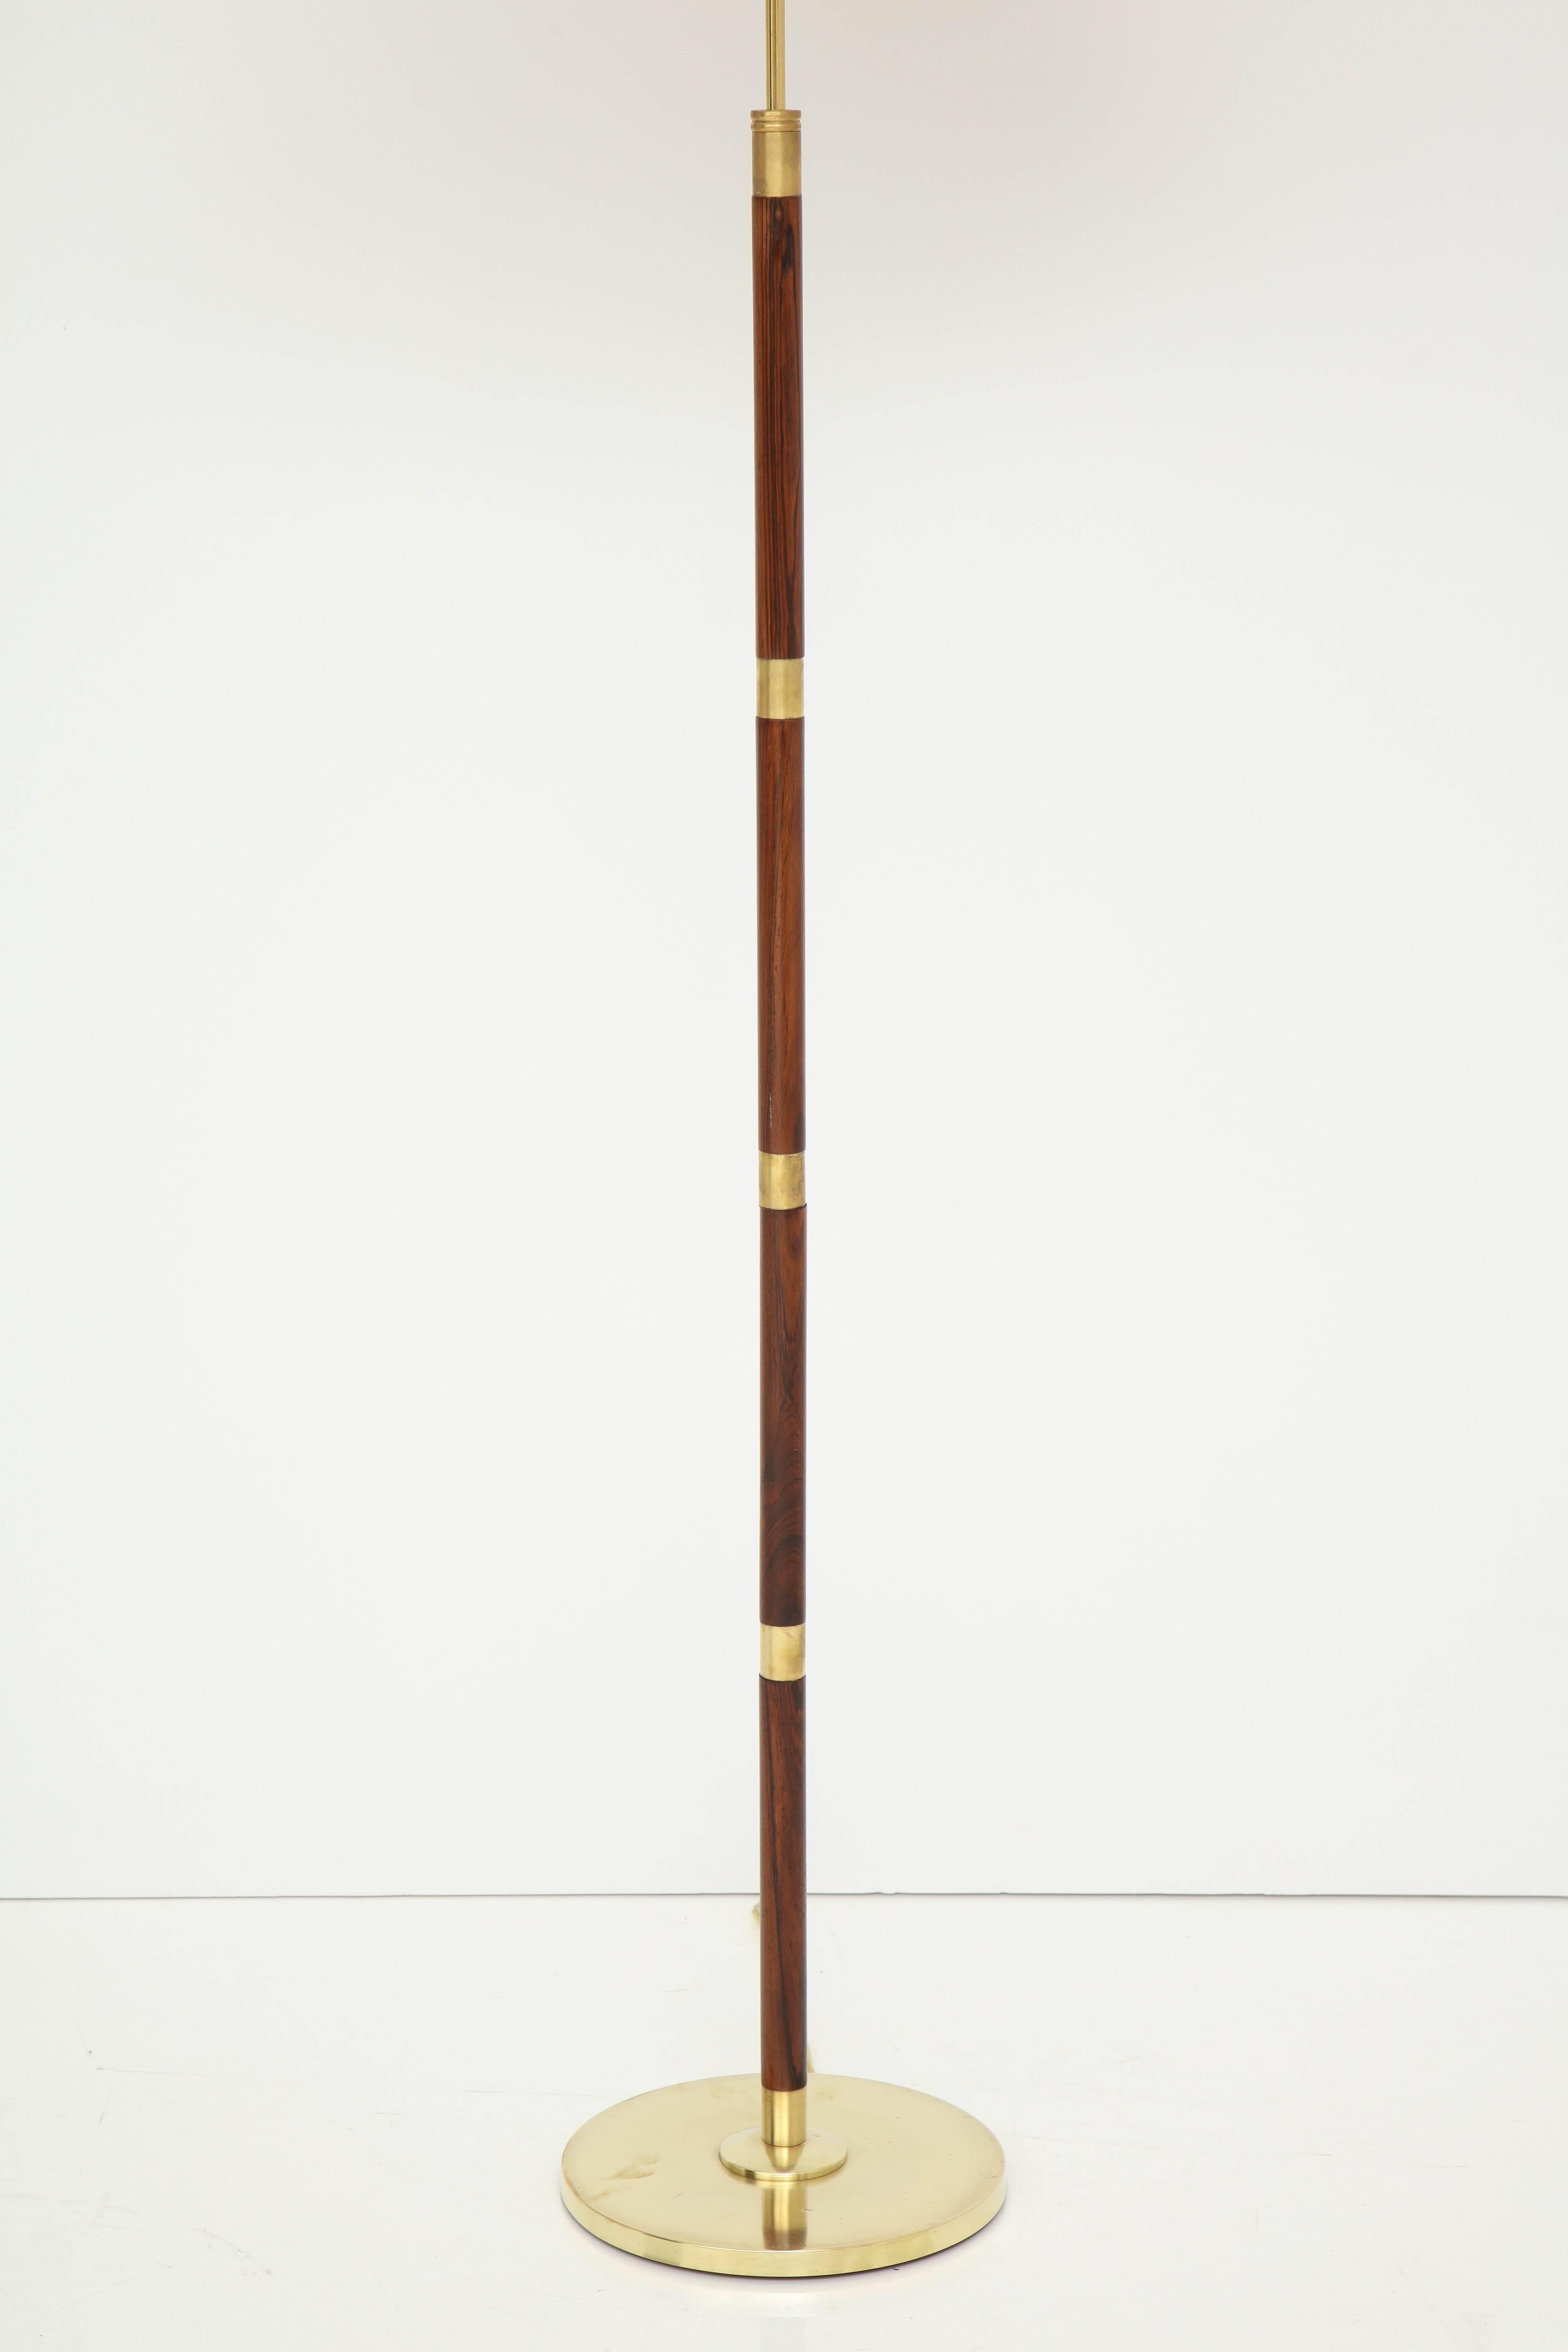 A Danish brass and rosewood floor lamp by Fog & Mørup, circa 1950s. Adjustable height and re-wired for the US.